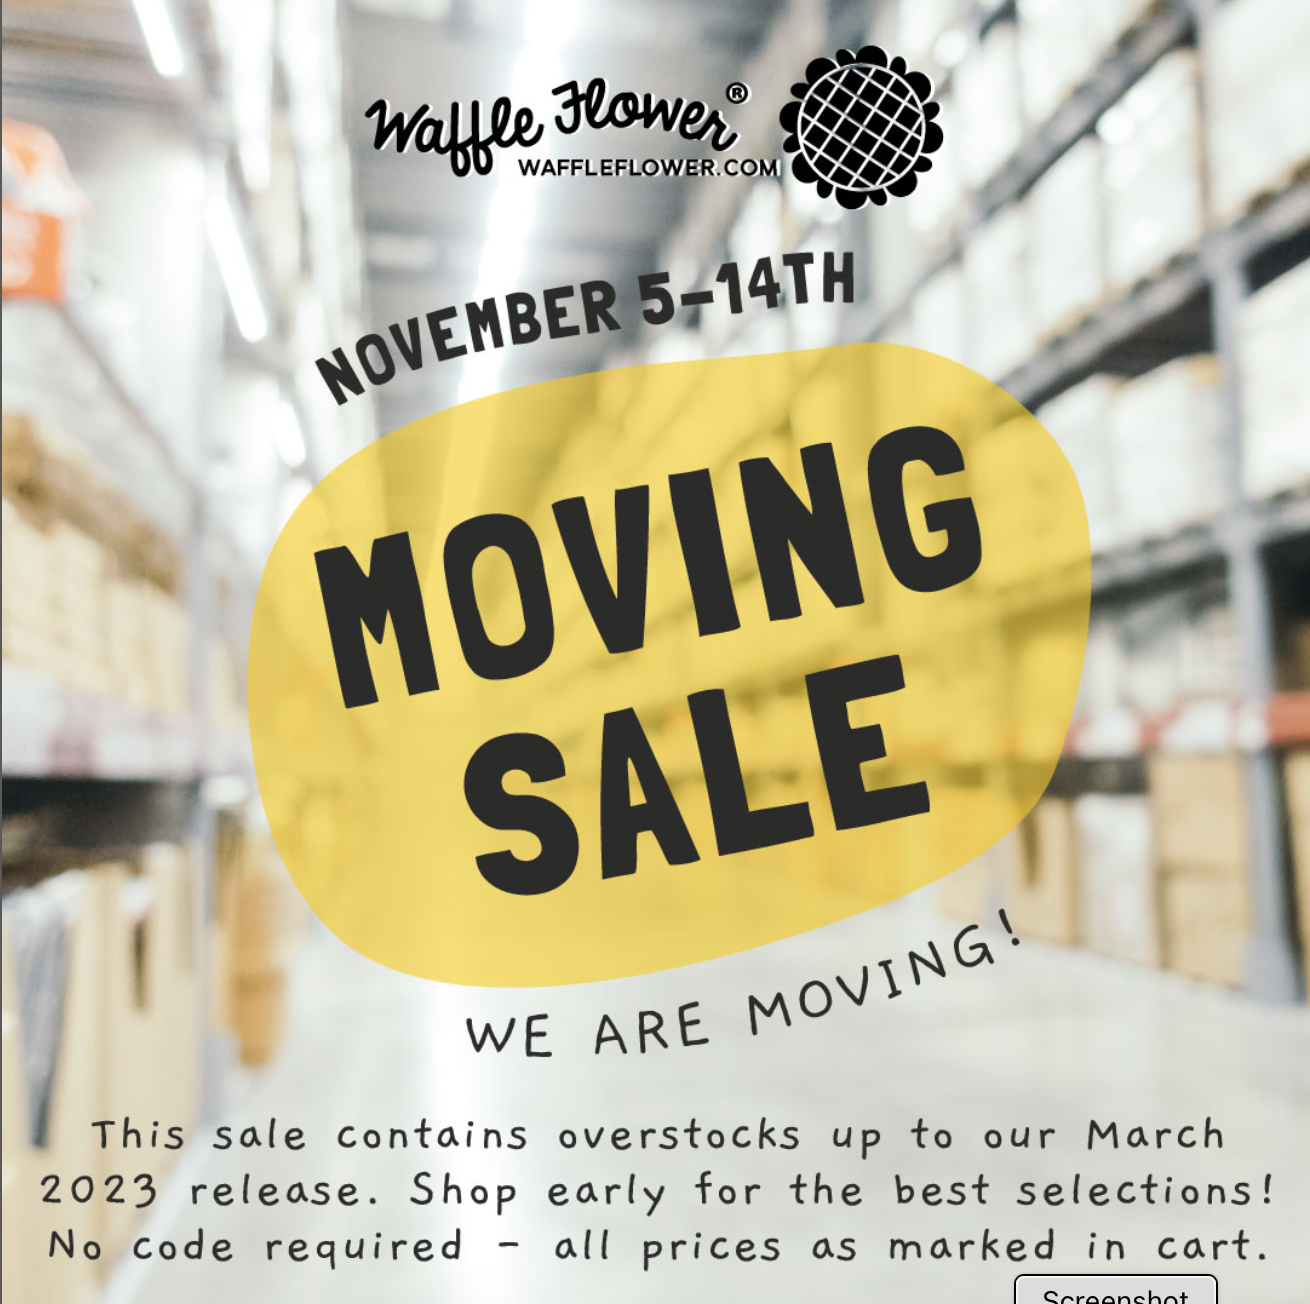 Moving Sale